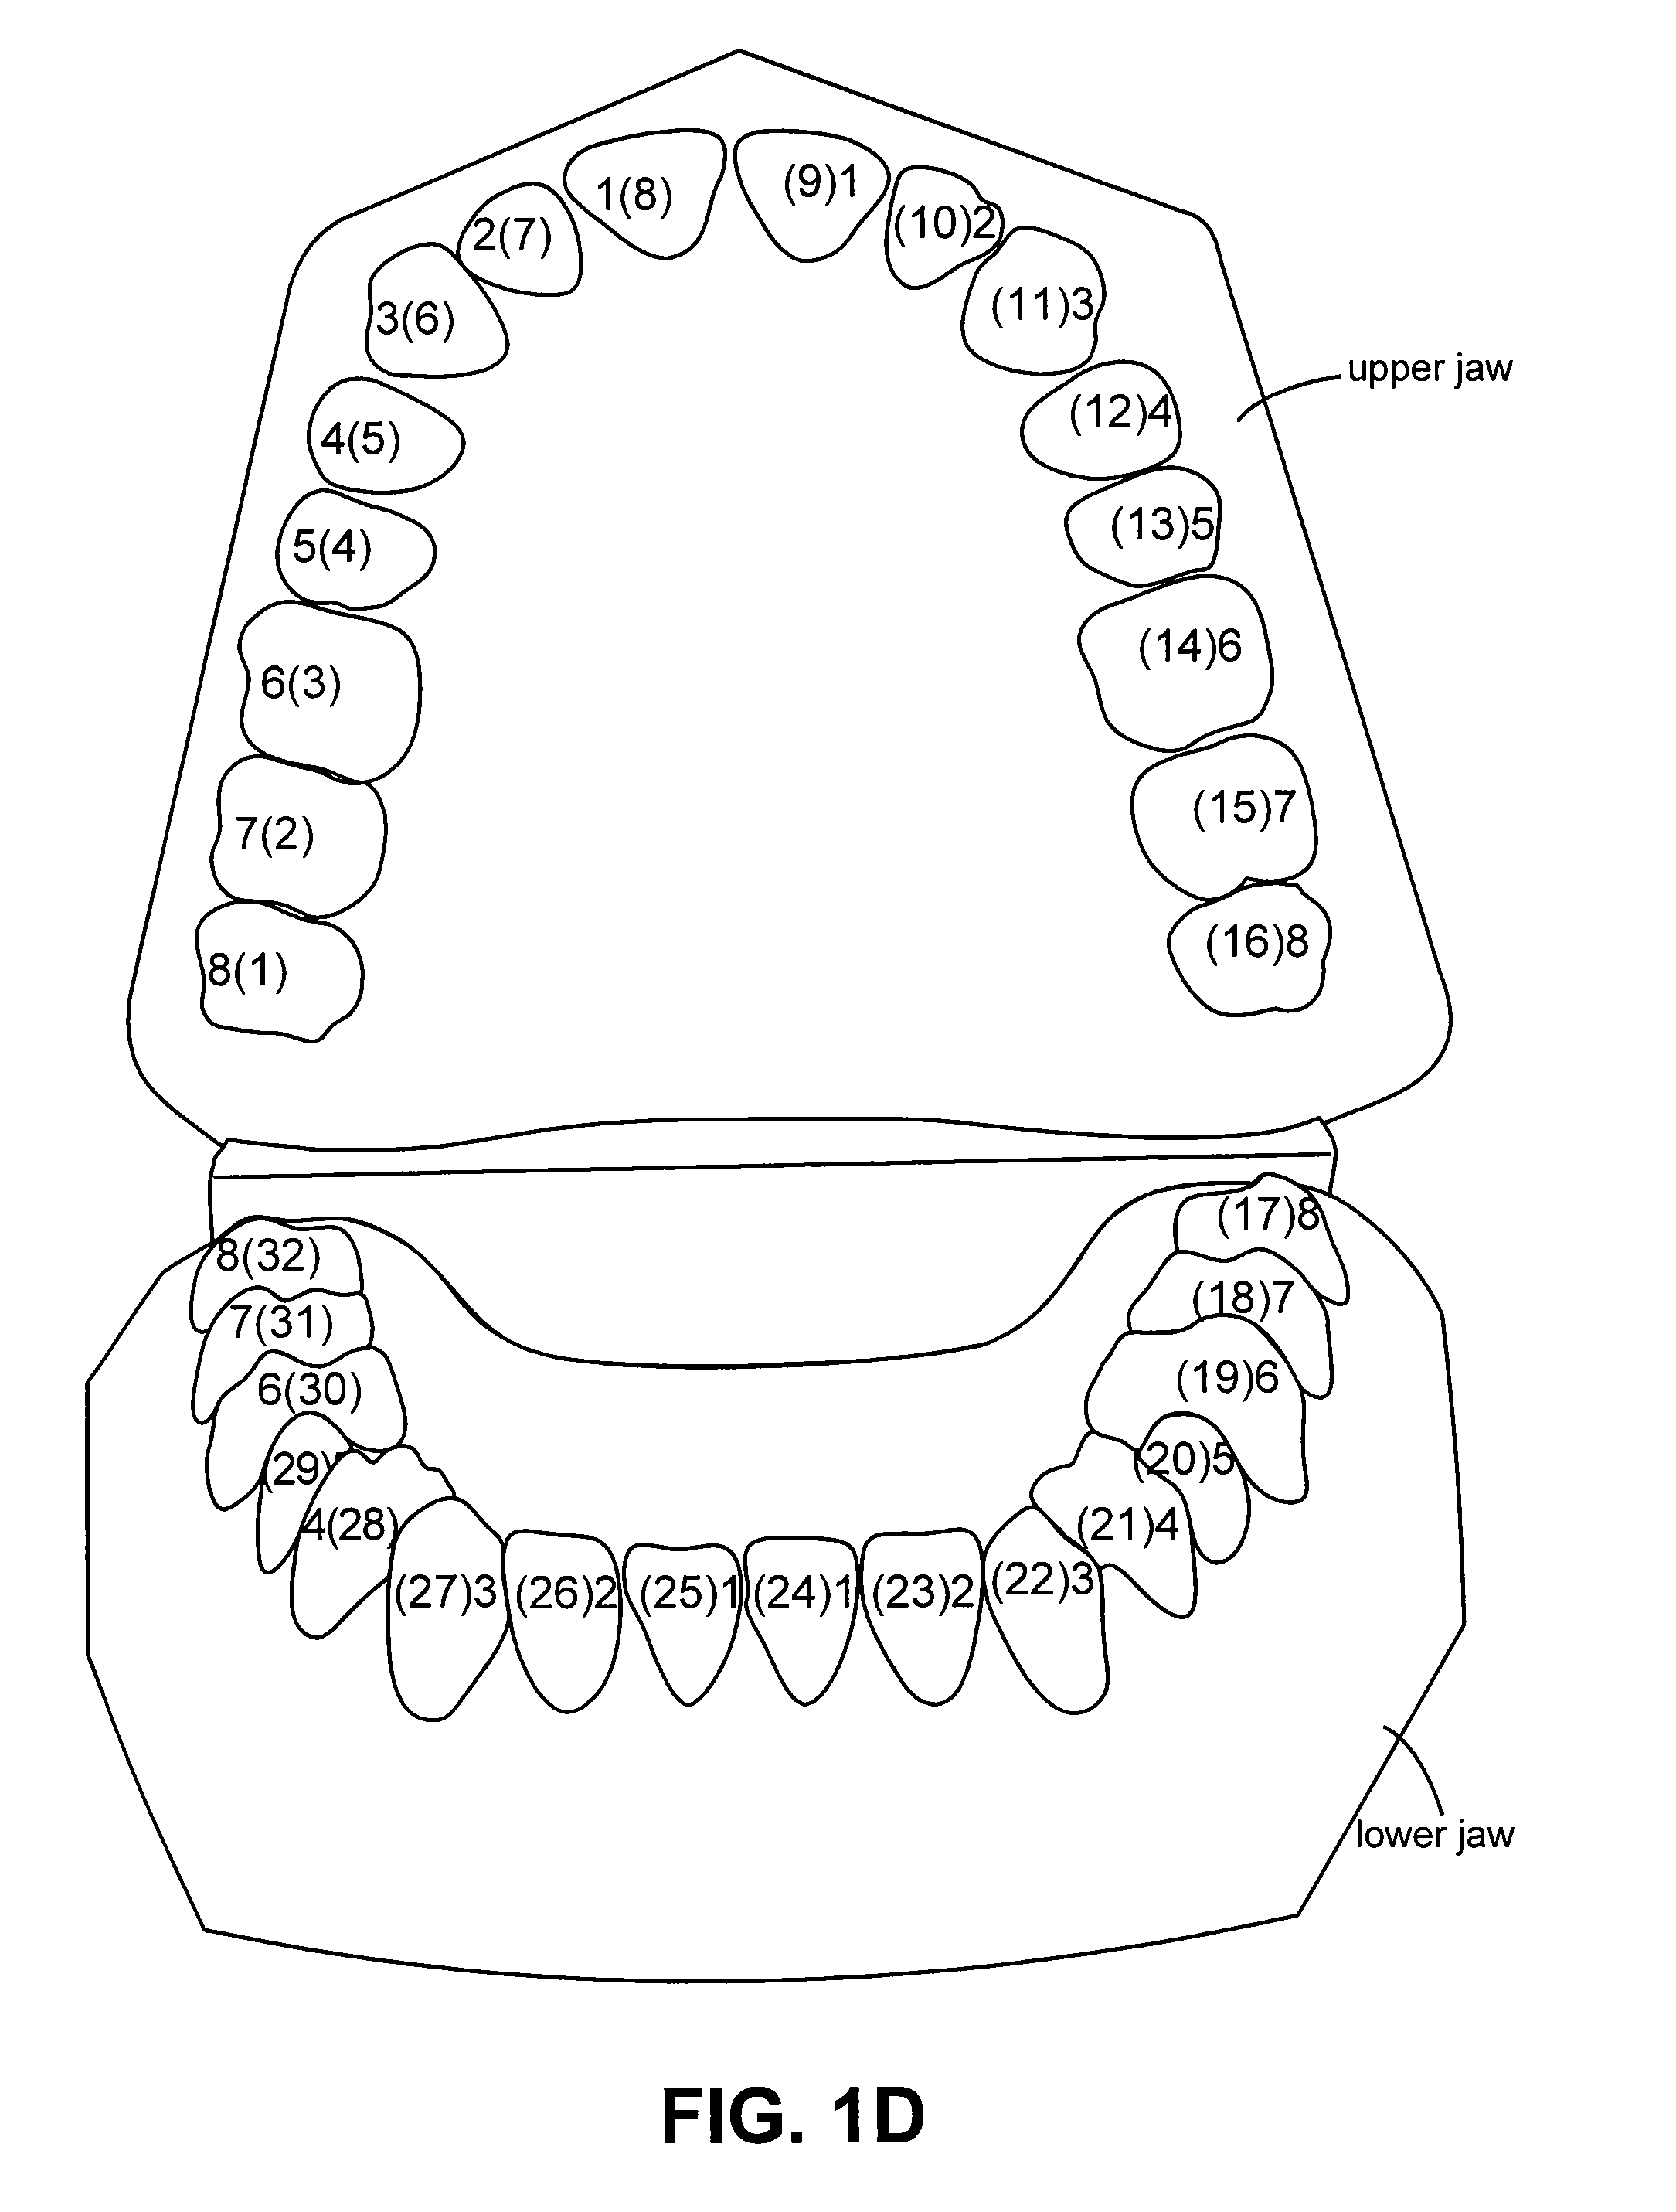 System and method for automatic construction of orthodontic reference objects